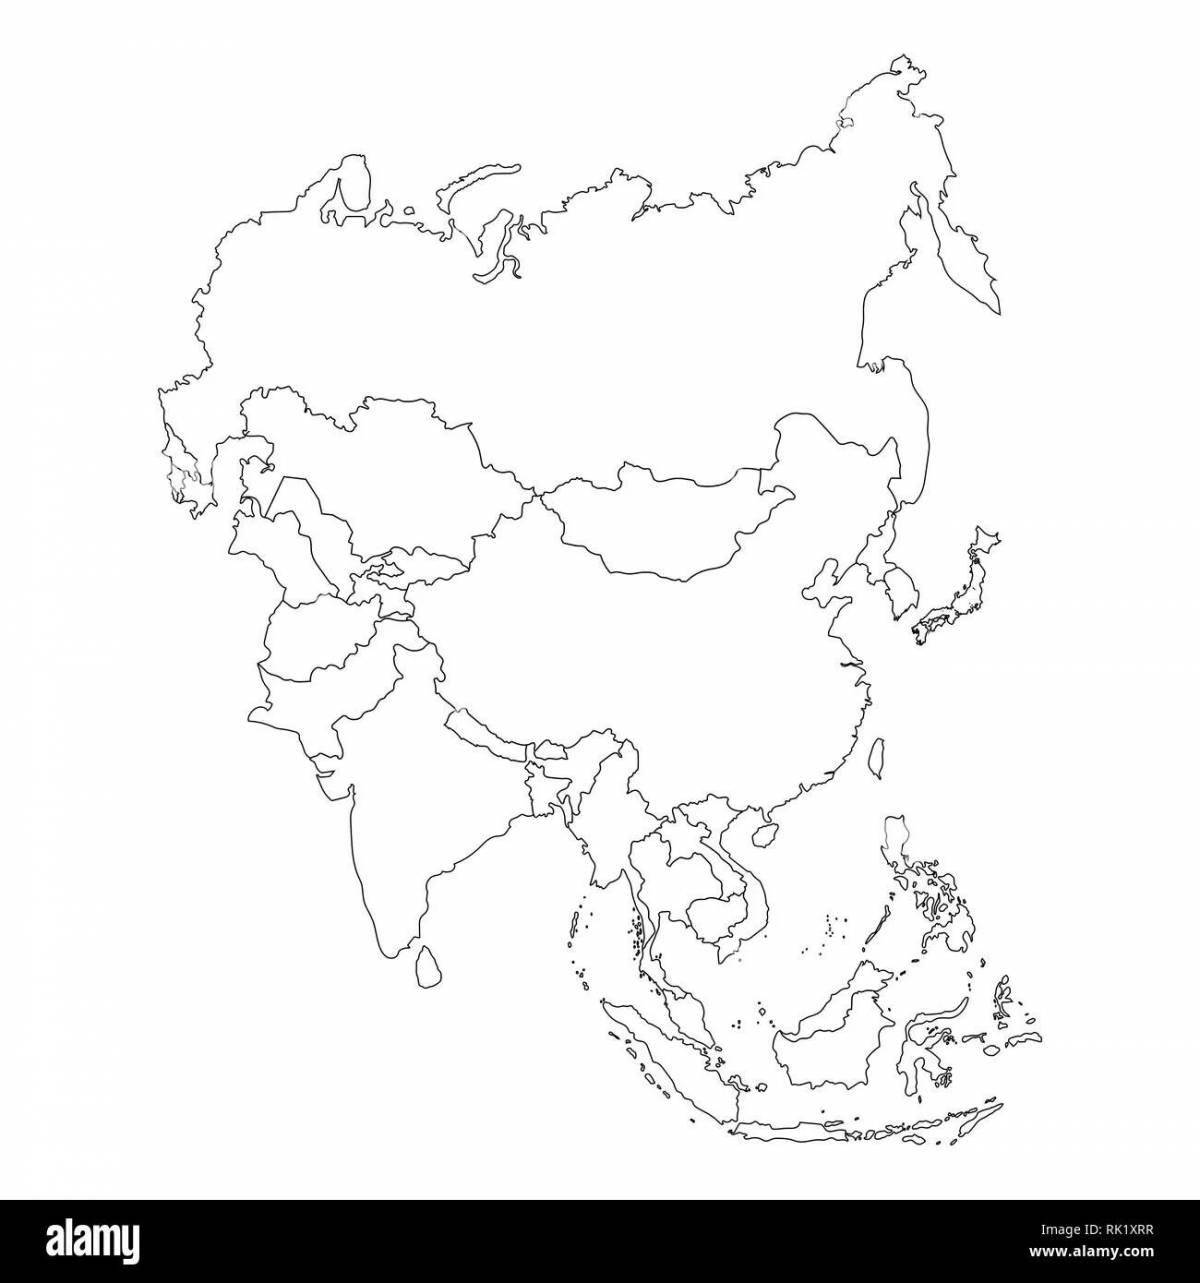 Coloring book inviting map of asia